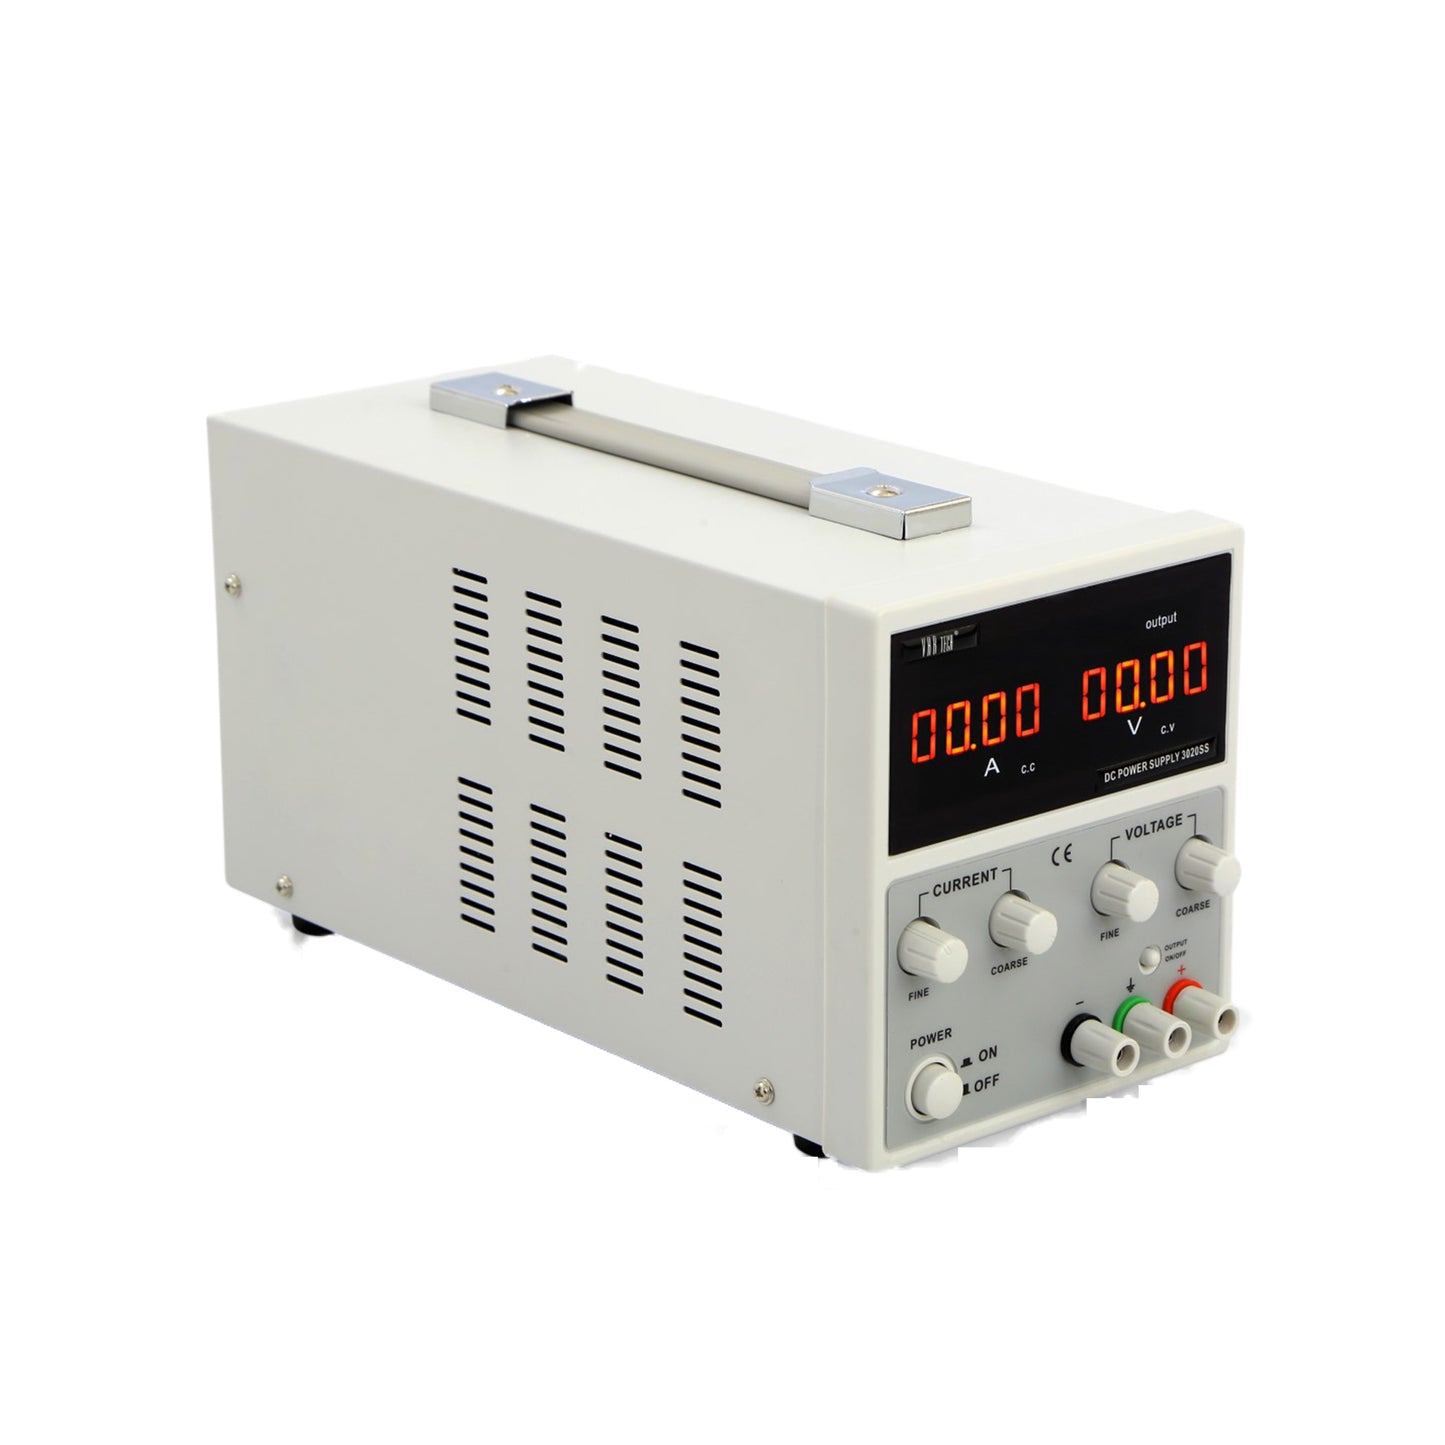 3020 SS 30V 20A SMPS based DC regulated power supply slim body